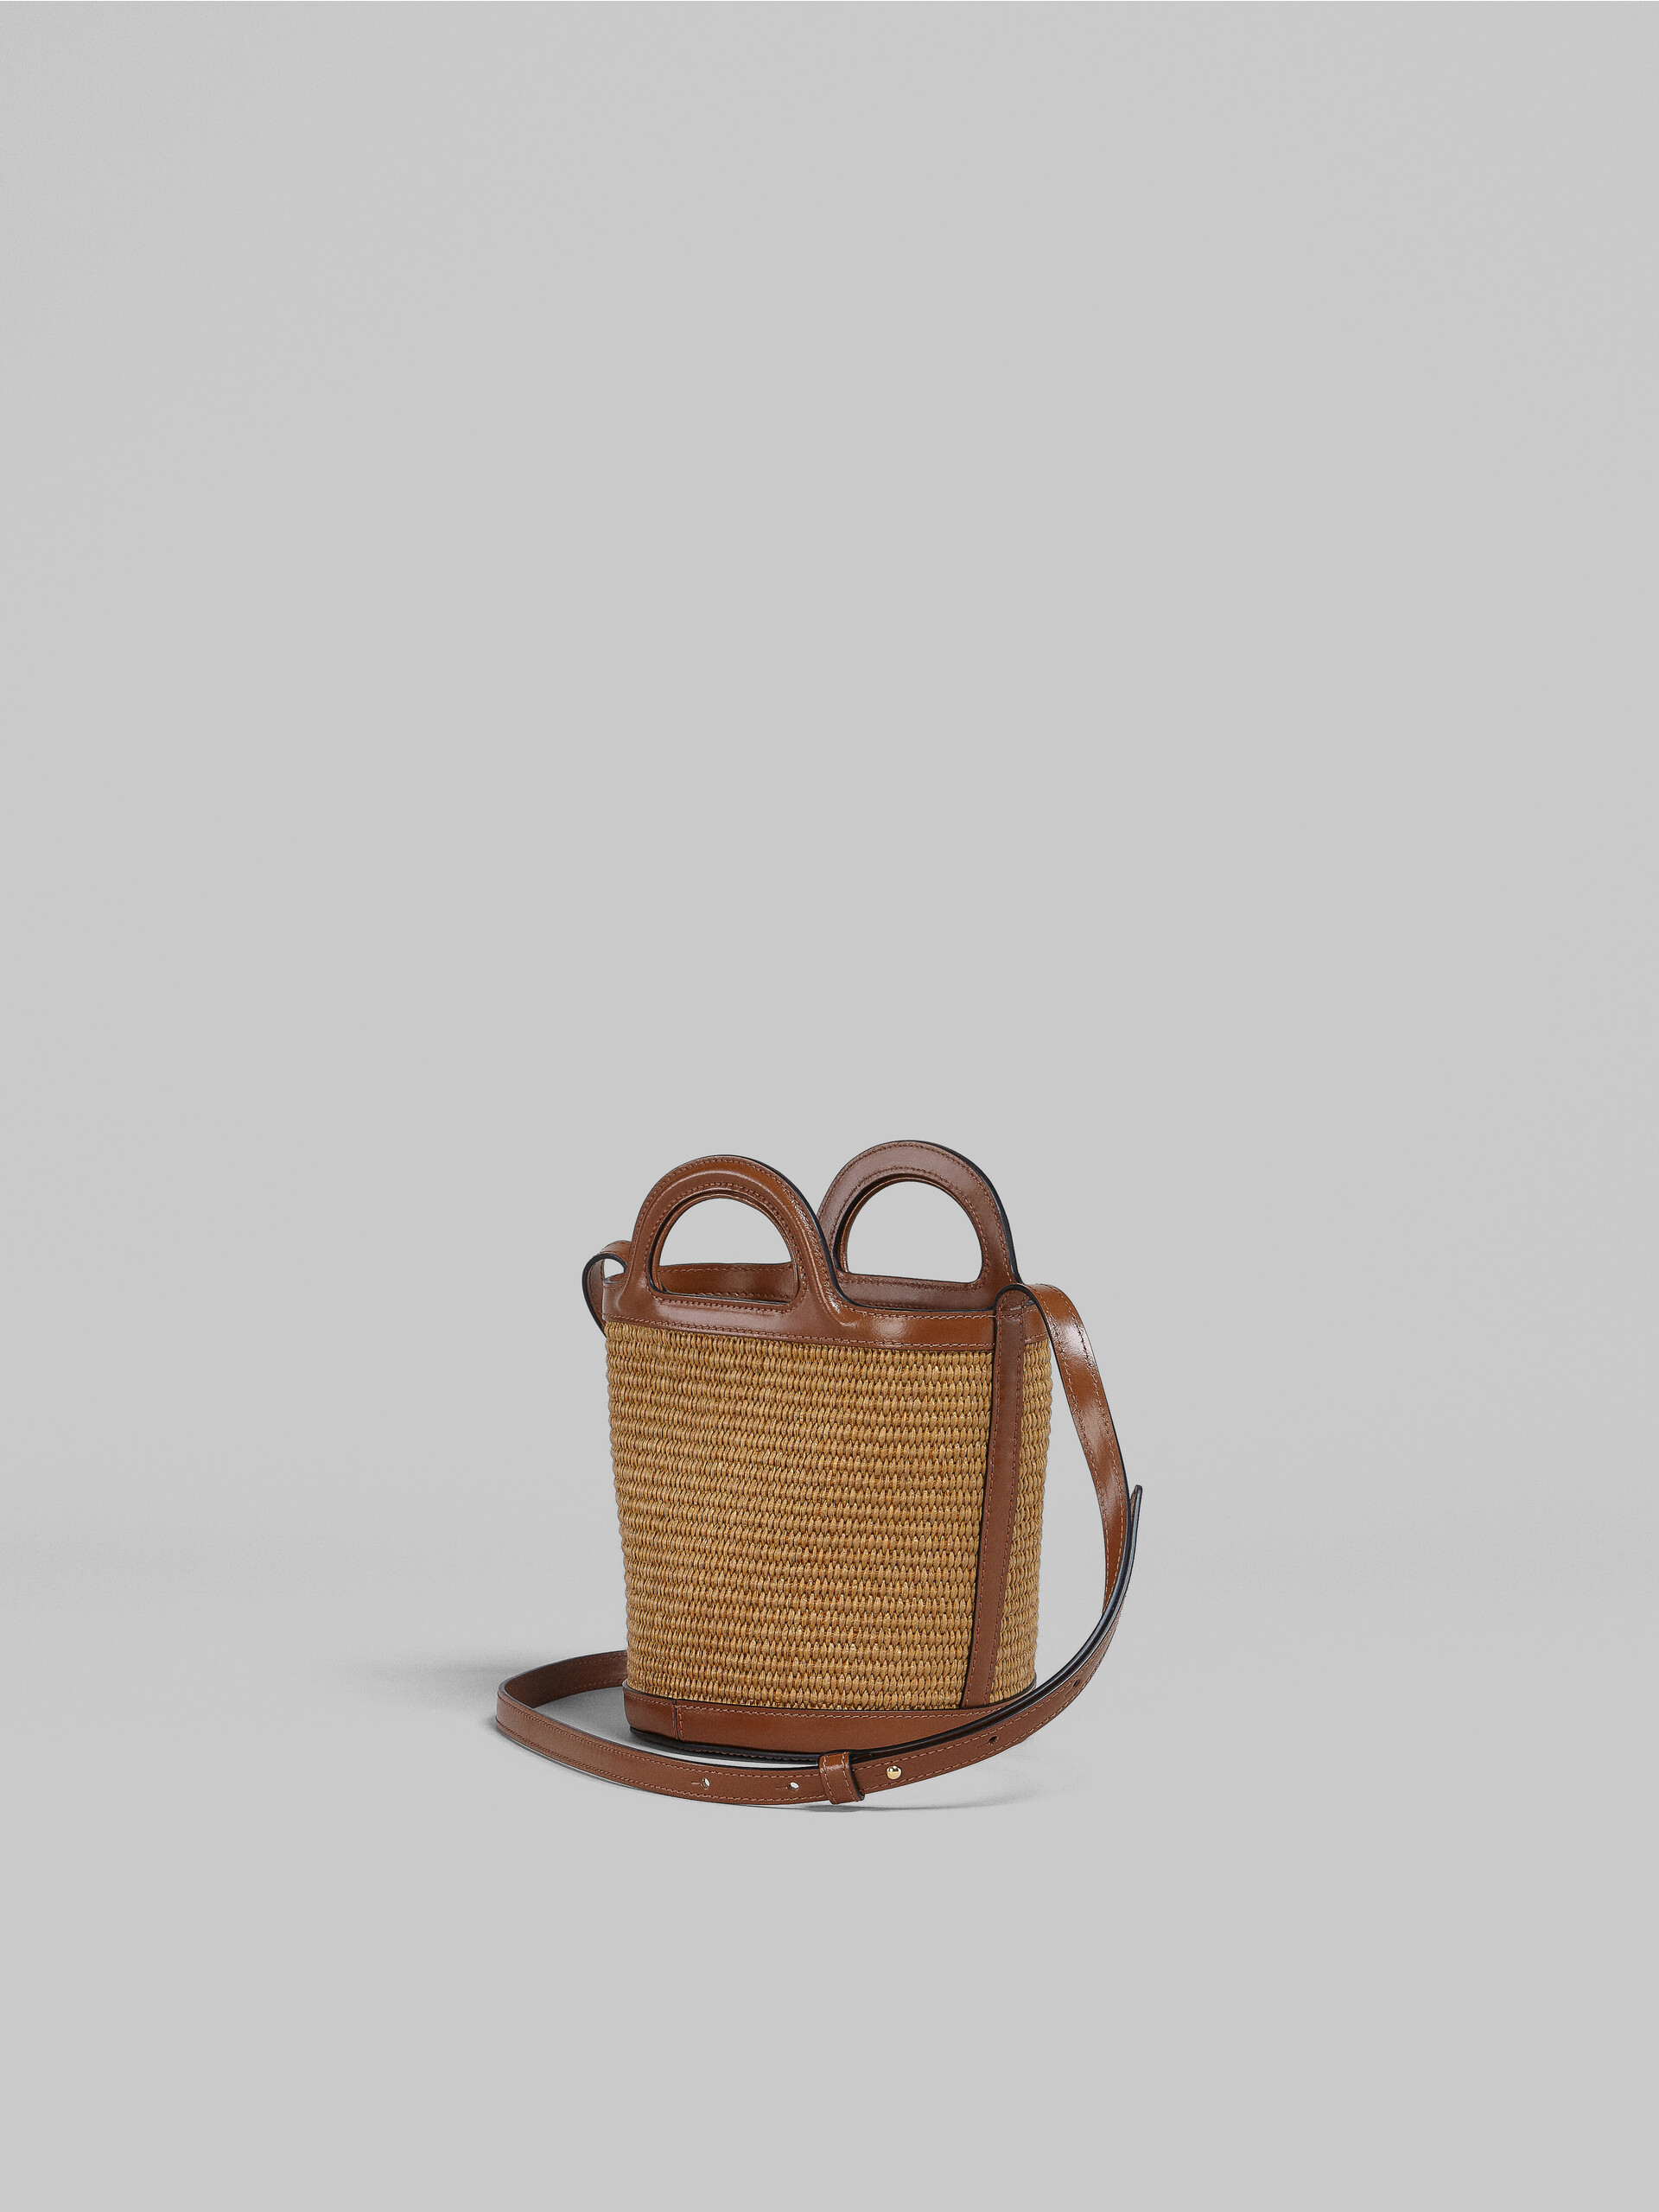 Tropicalia Small Bucket Bag in brown leather and raffia - Shoulder Bags - Image 3